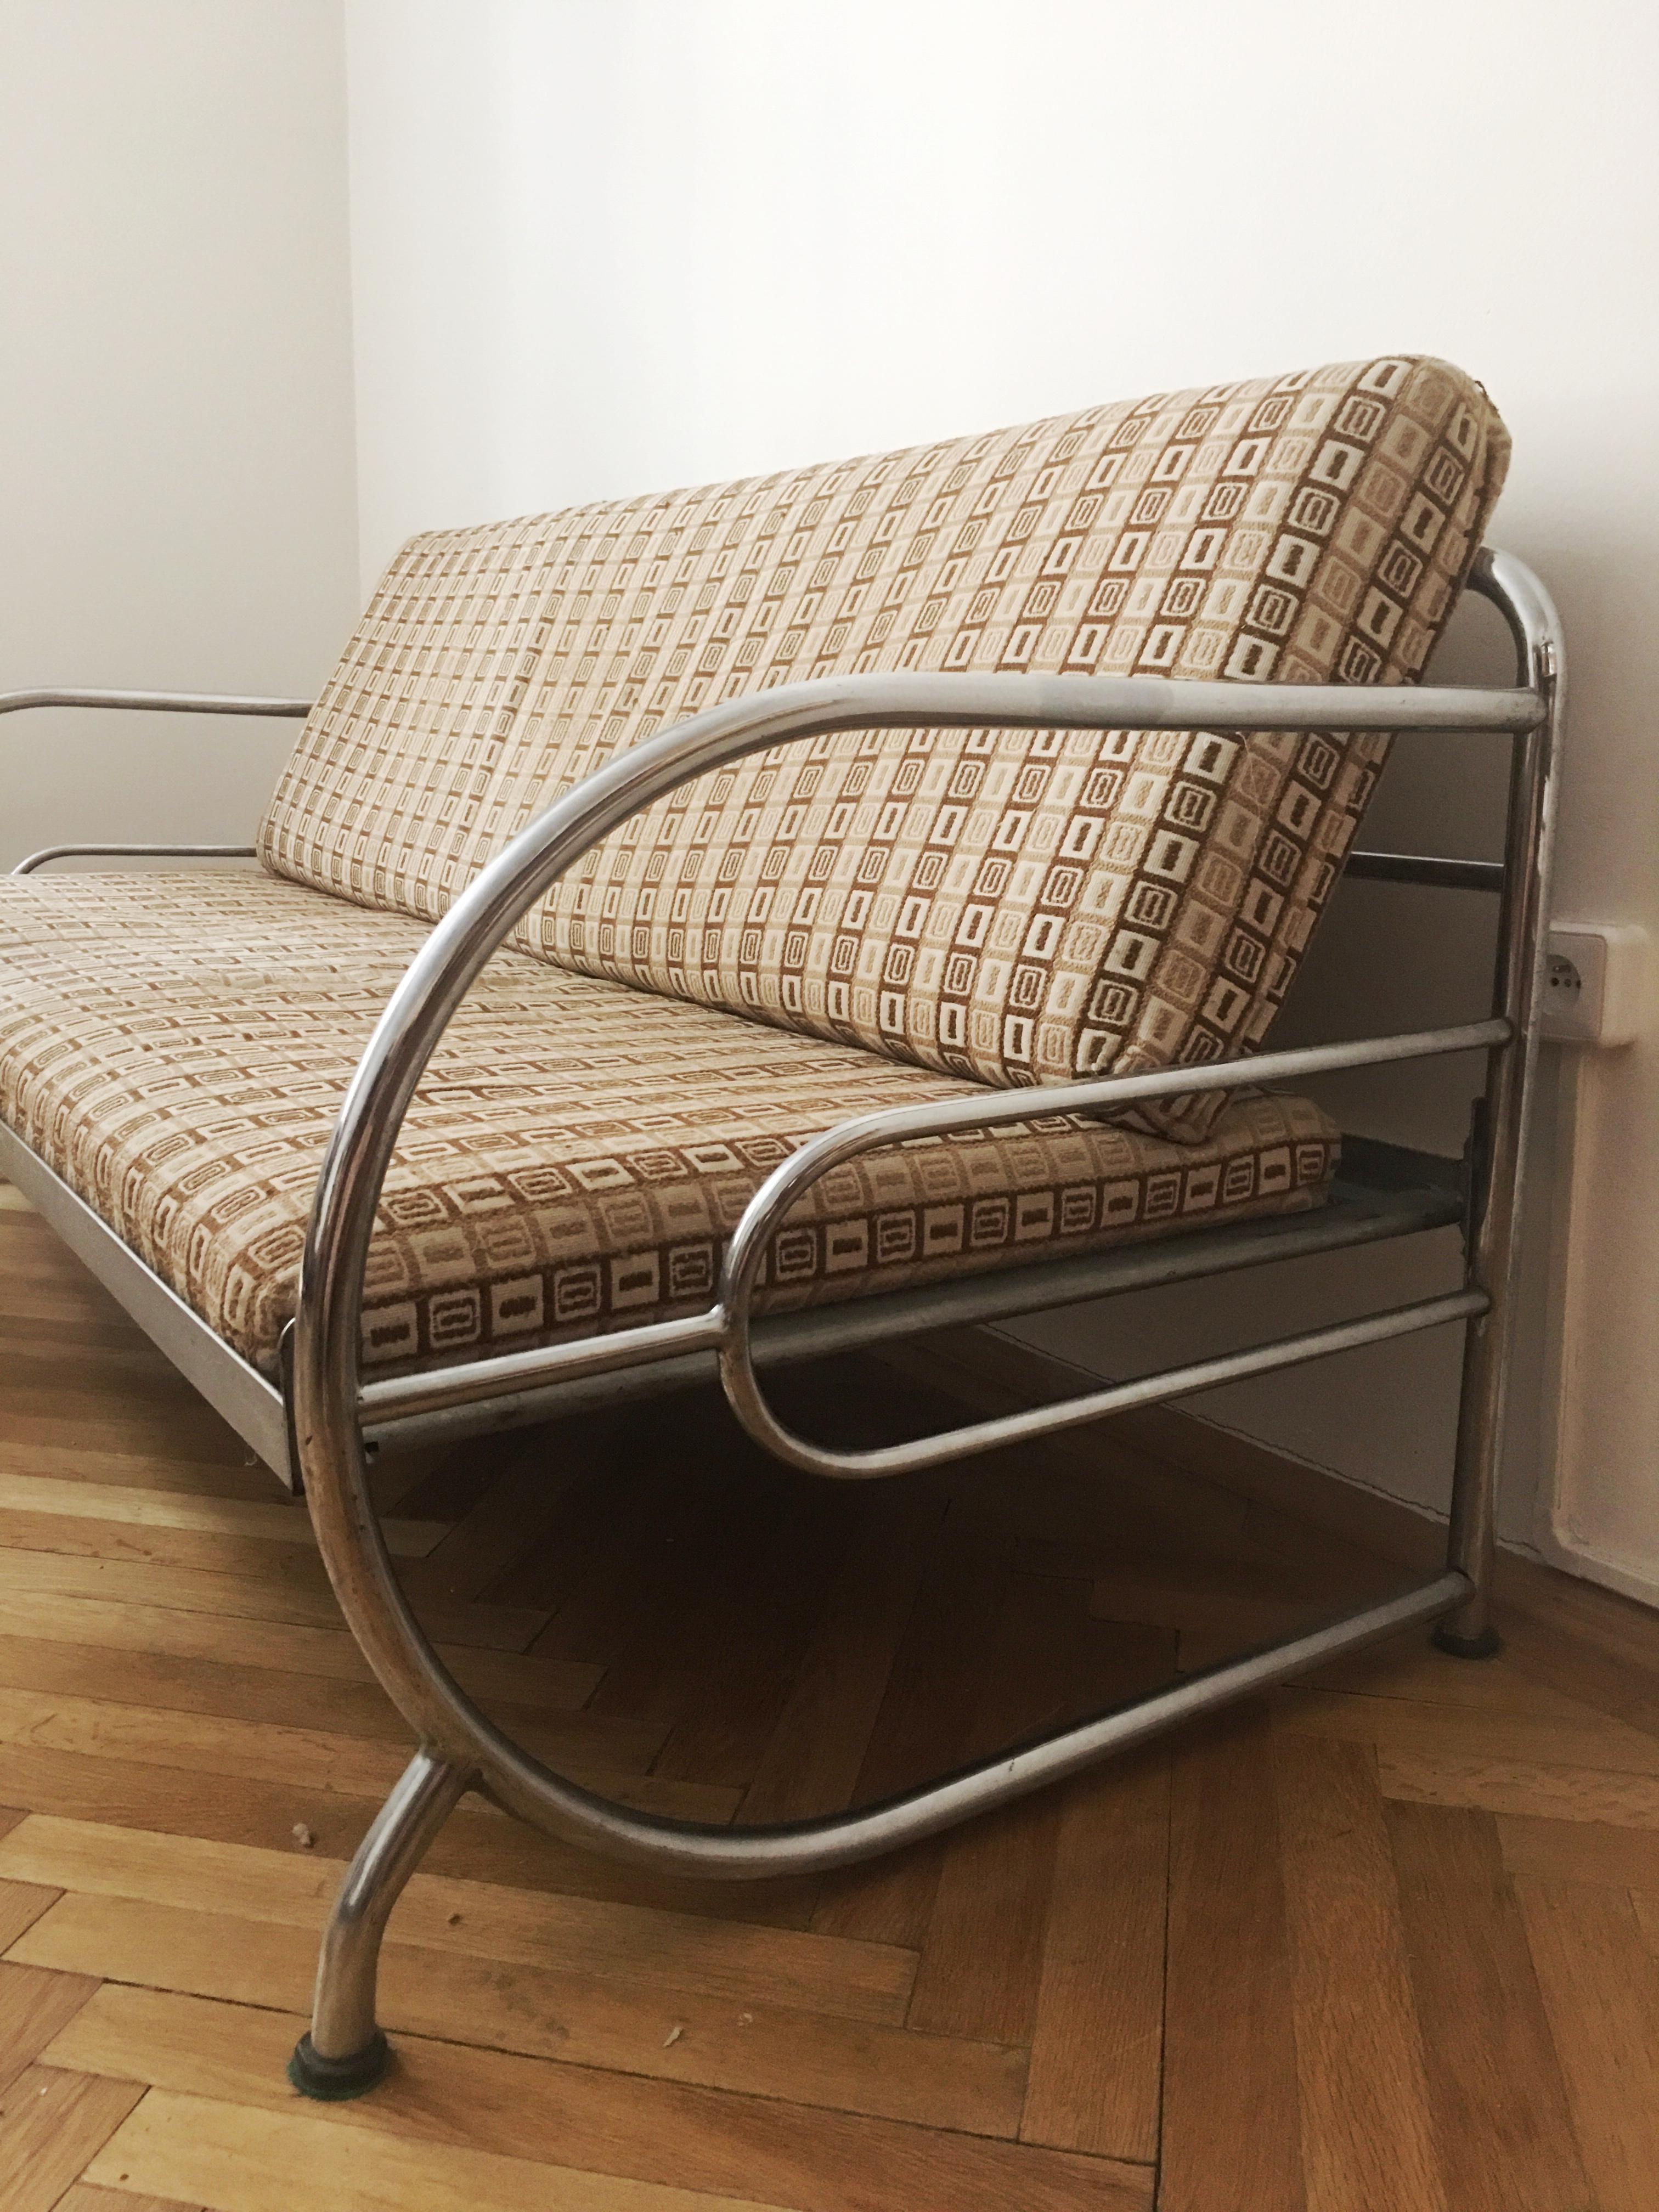 Czech Tubular Steel Couch / Daybed by Robert Slezak, 1930s For Sale